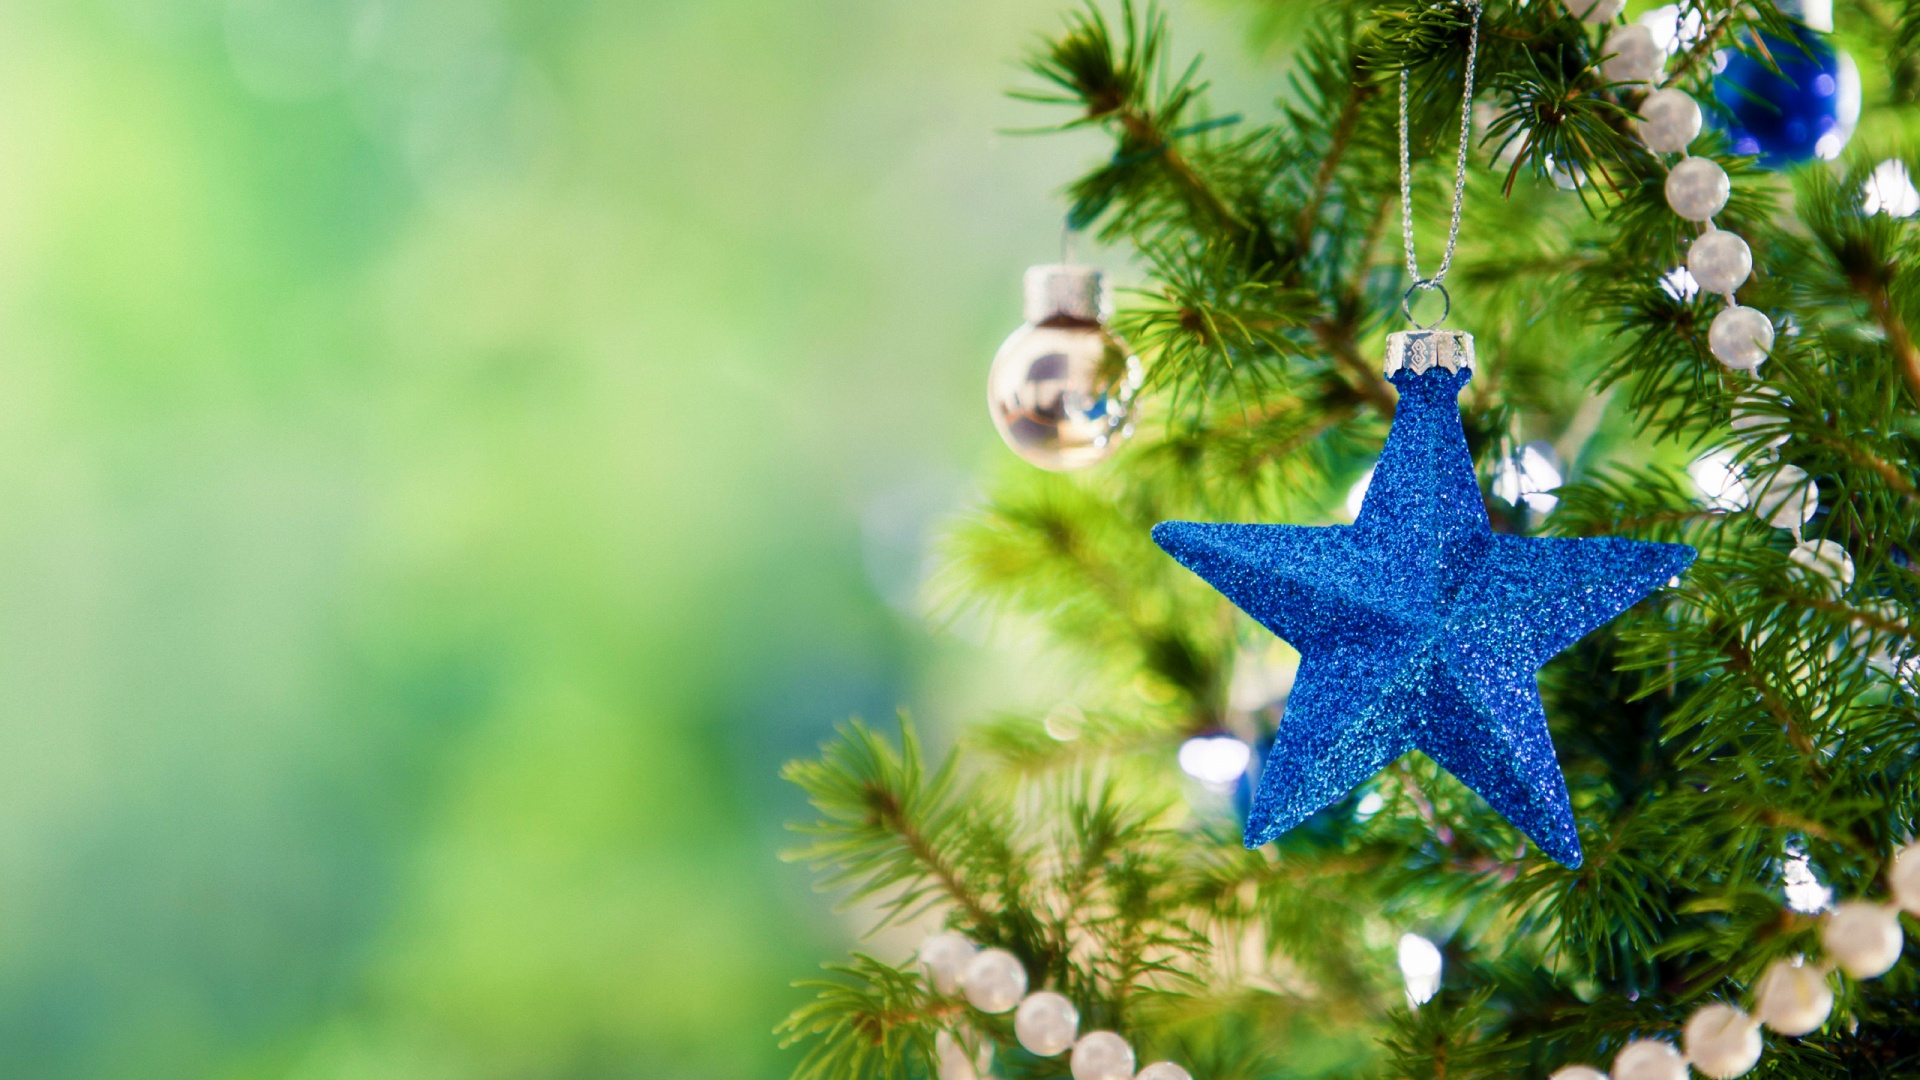 Wallpaper For Blue Star And Ball On The Christmas Tree